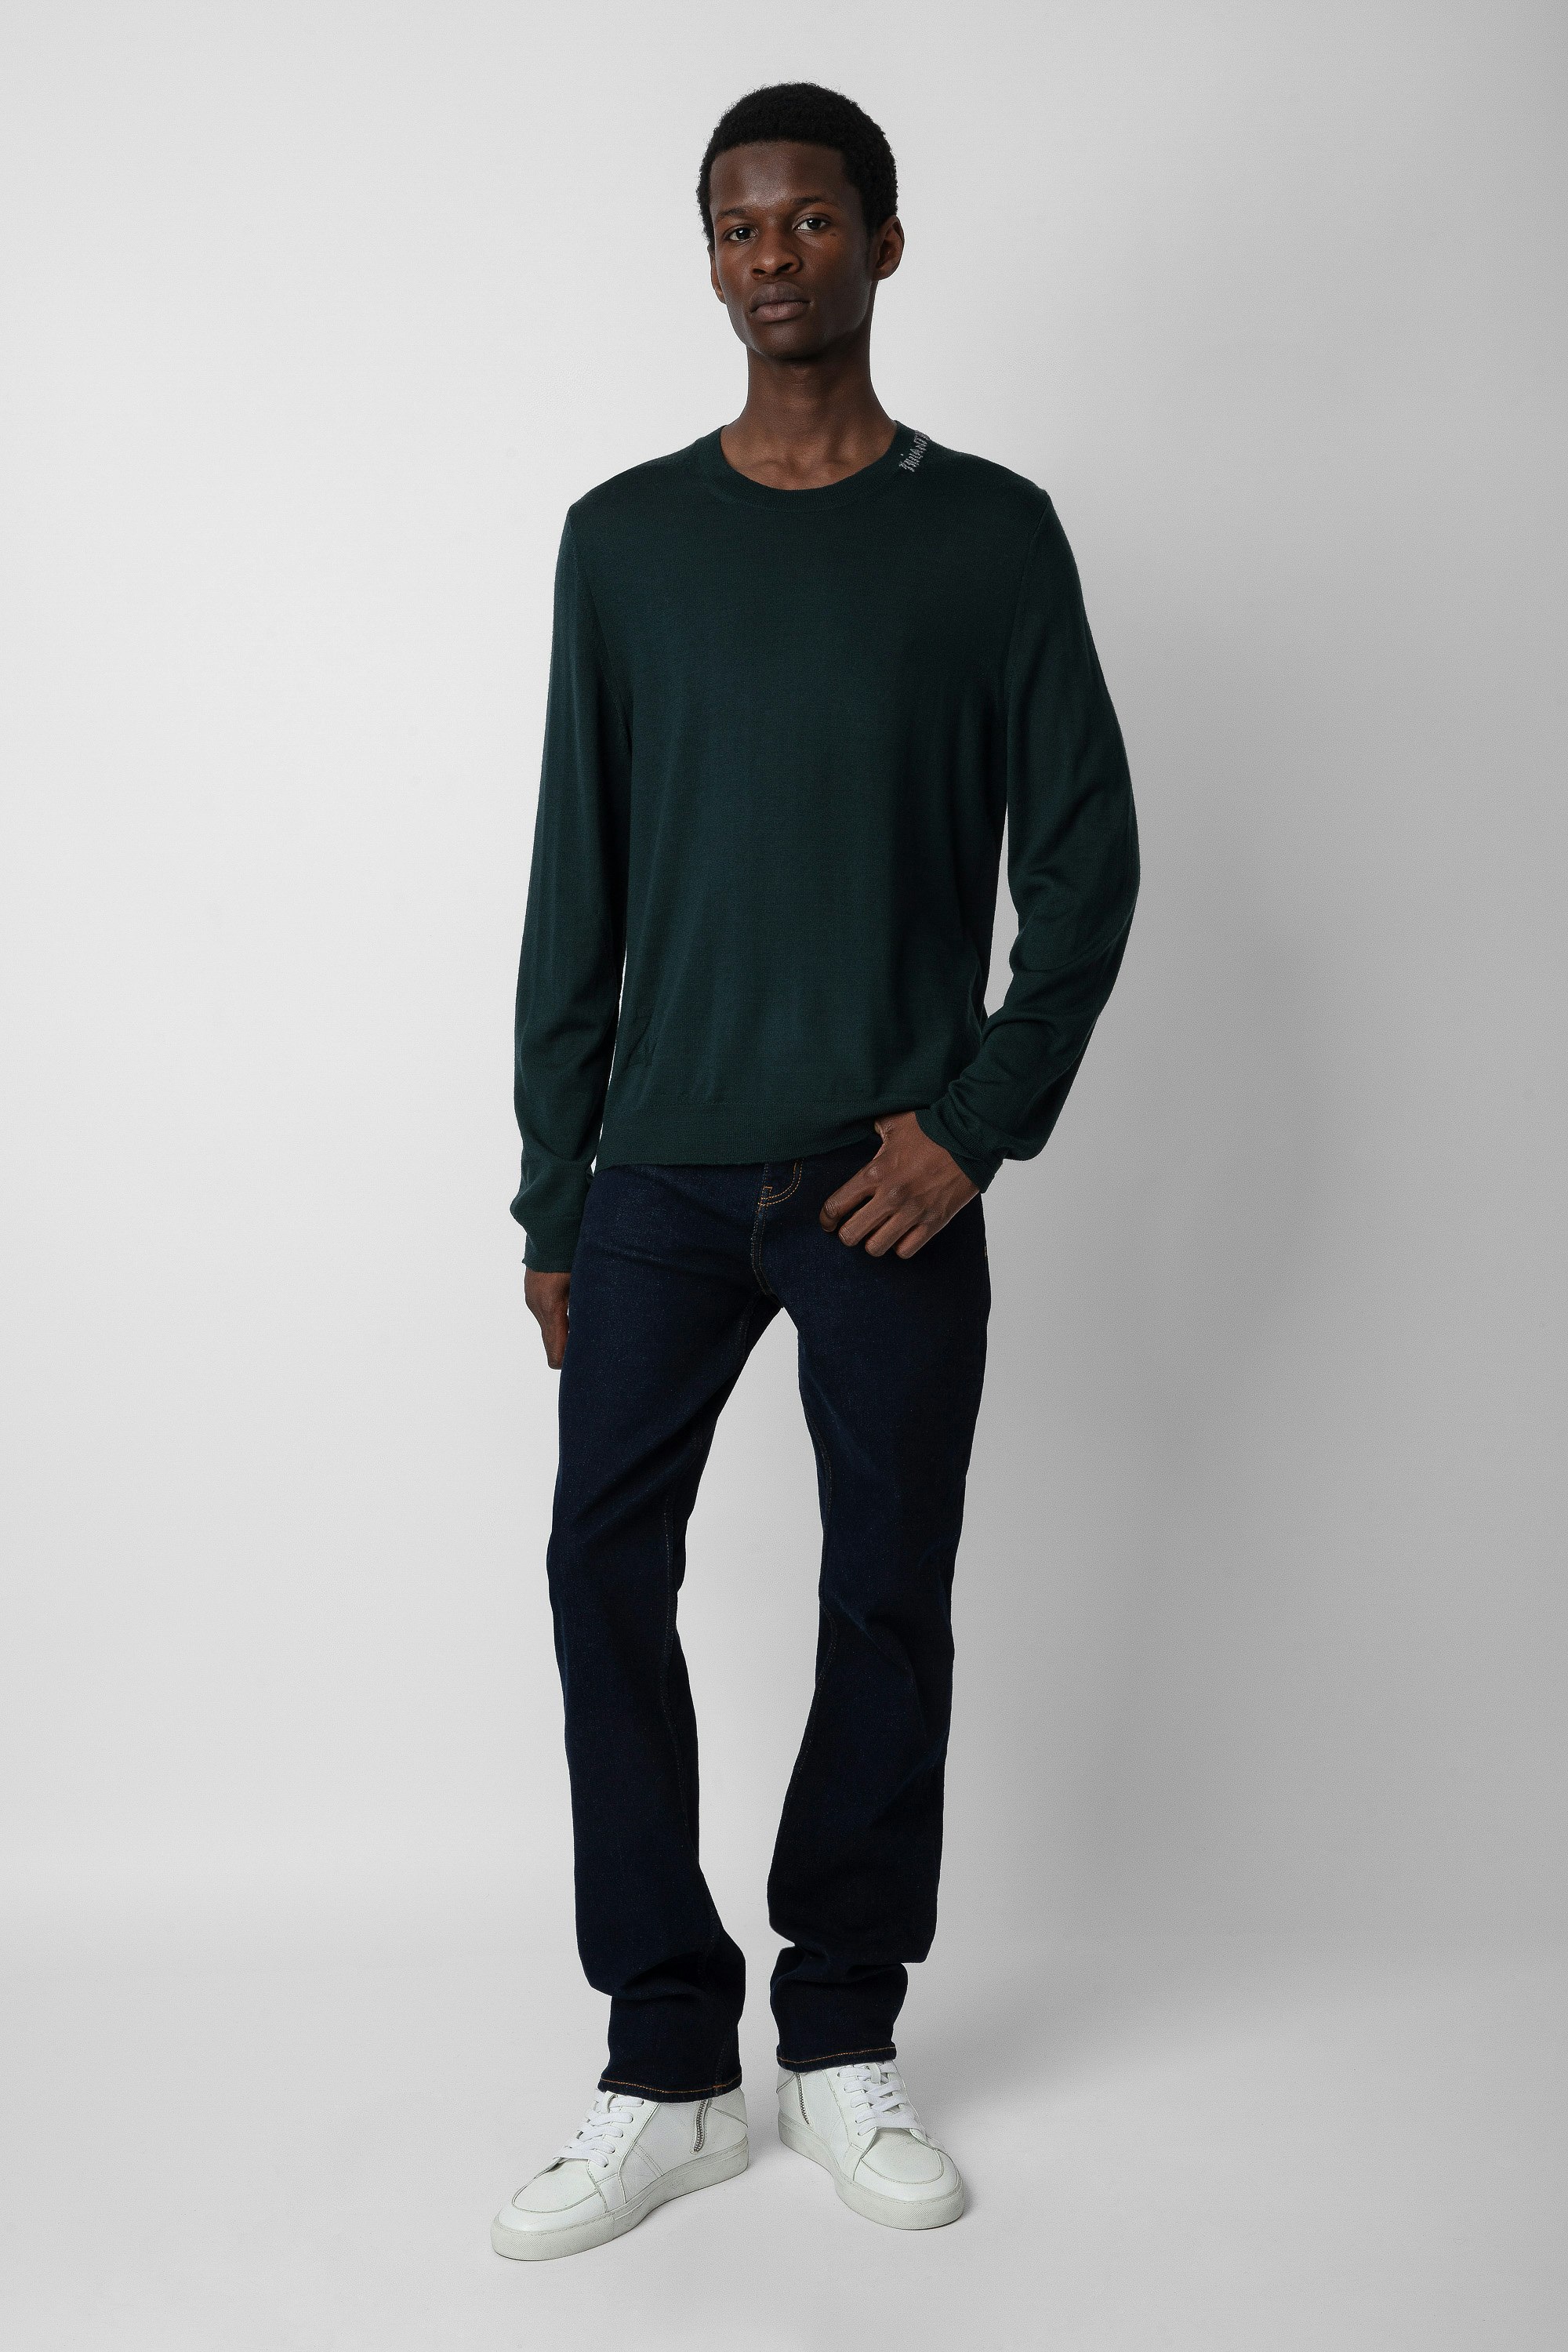 Kennedy Jumper - Men’s green merino wool jumper with “Philanthrope” embroidery on the neckline.